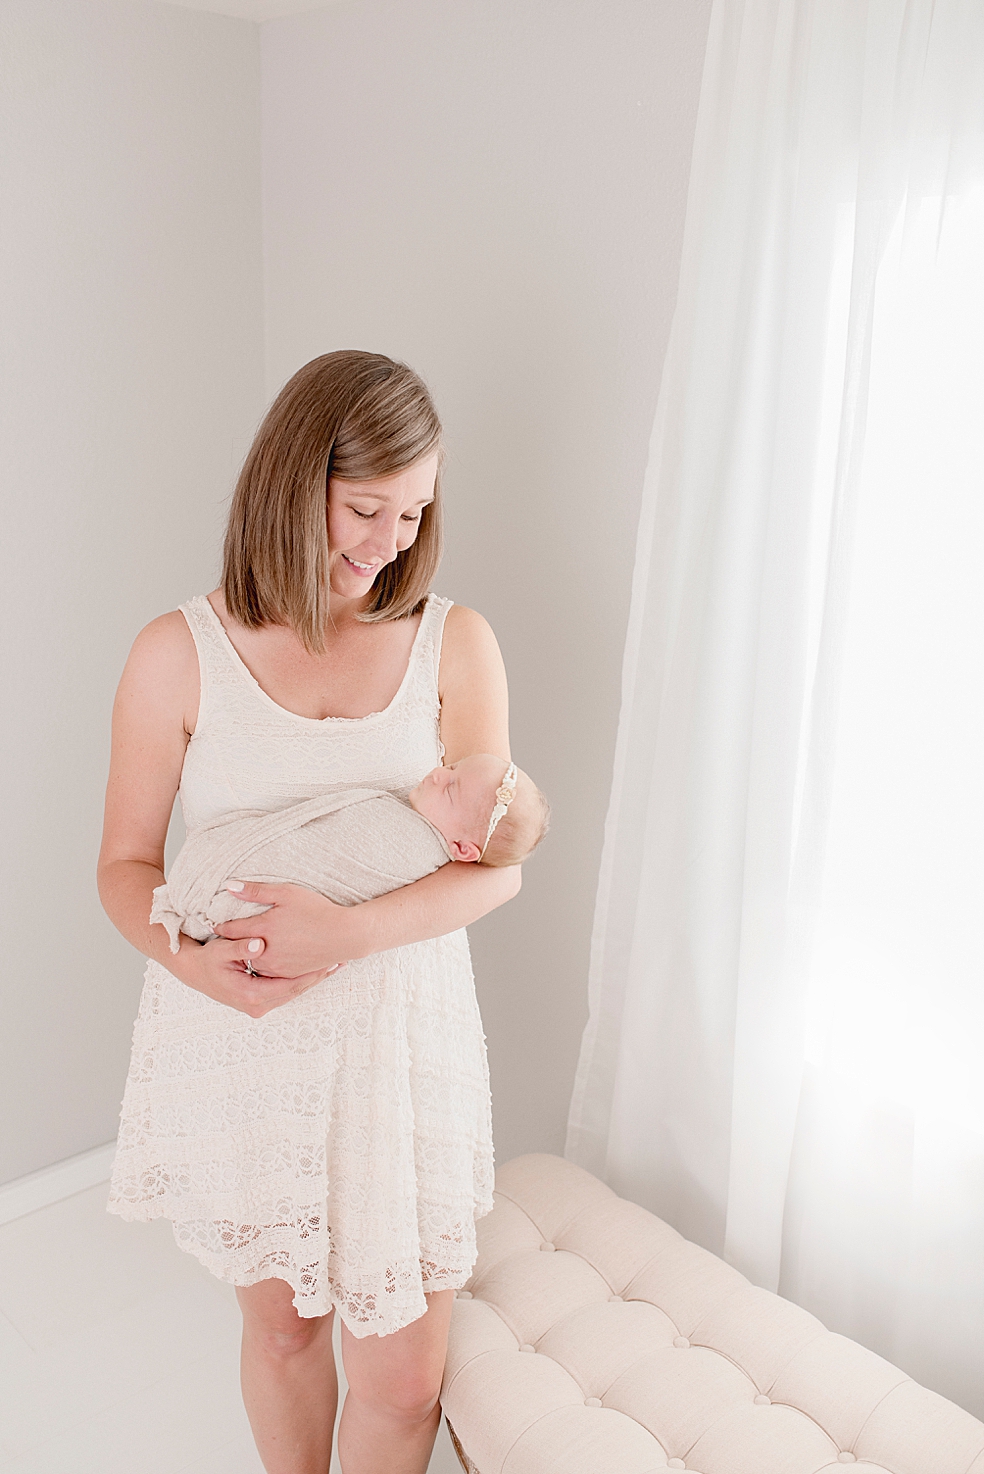 Mom smiling down at her new baby girl | Photo by Jessica Lee Photography